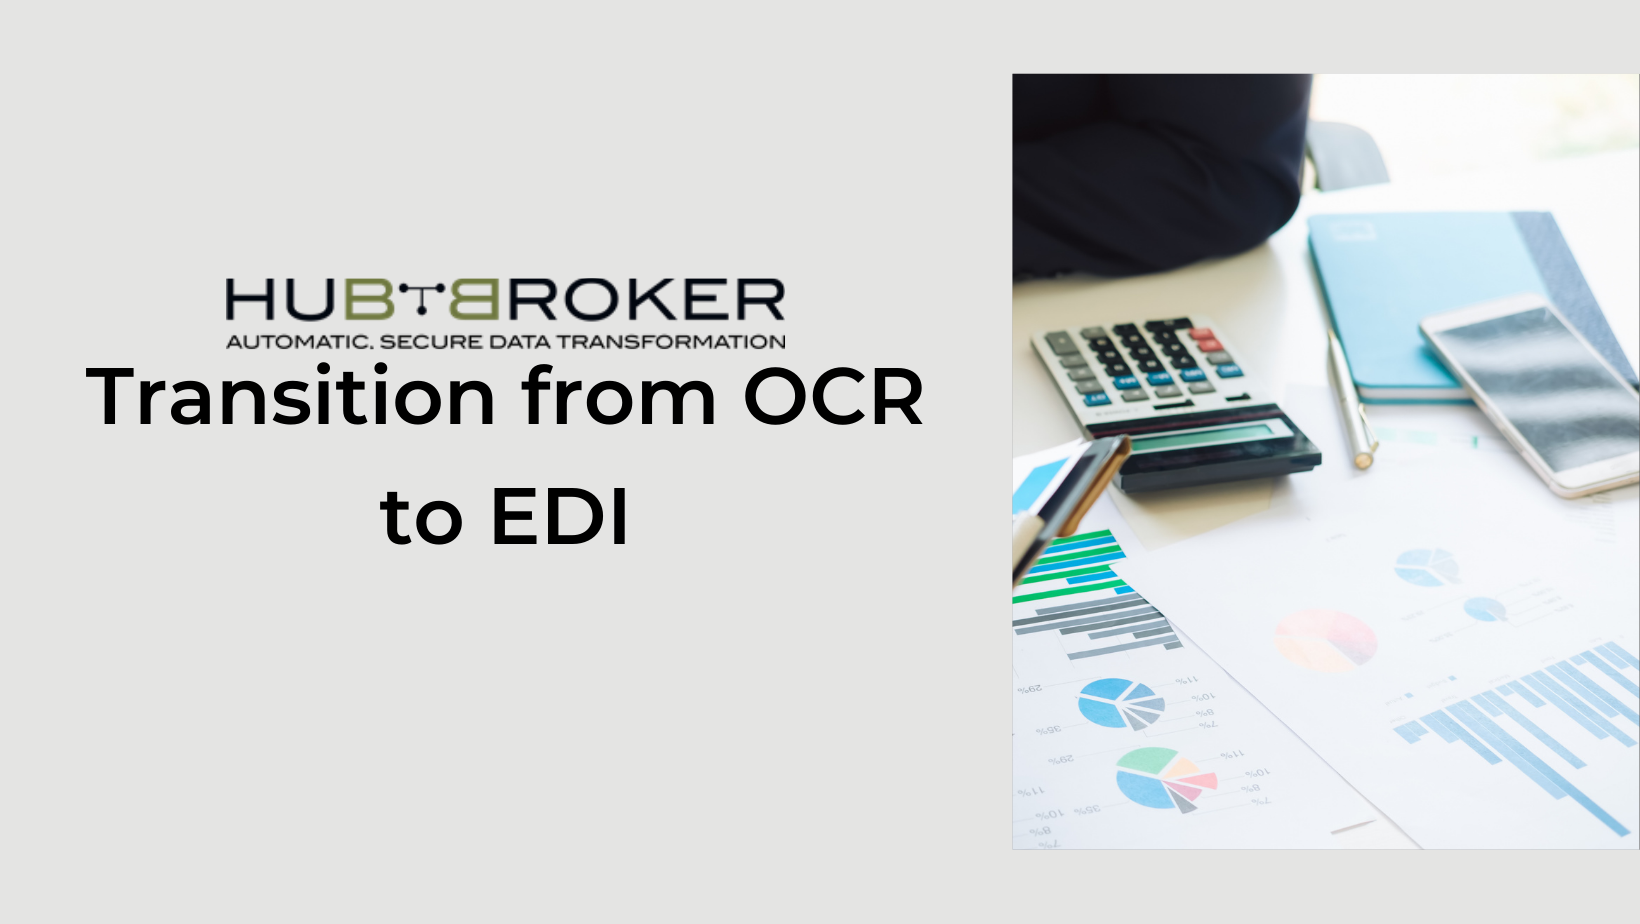 How to Transition from OCR to EDI?